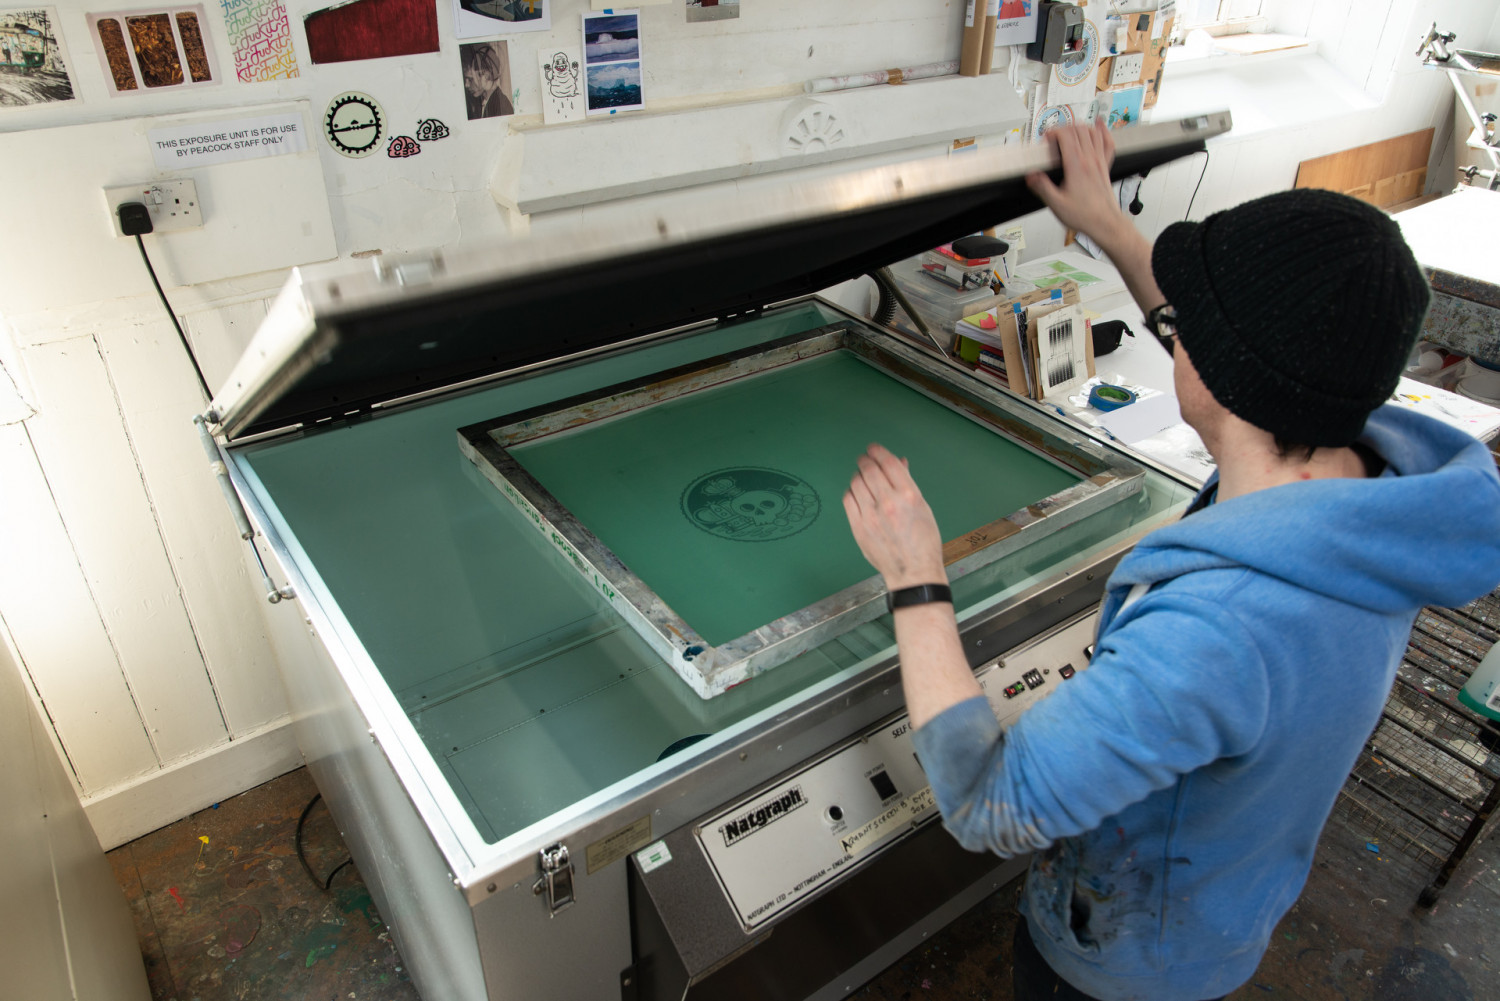 Silkscreen: Photo Emulsion Coating, Inkman Stan's silkscreen is looking  all ready, coated in a photo emulsion coating. It's the underrated but,  perhaps, most important step in creating all